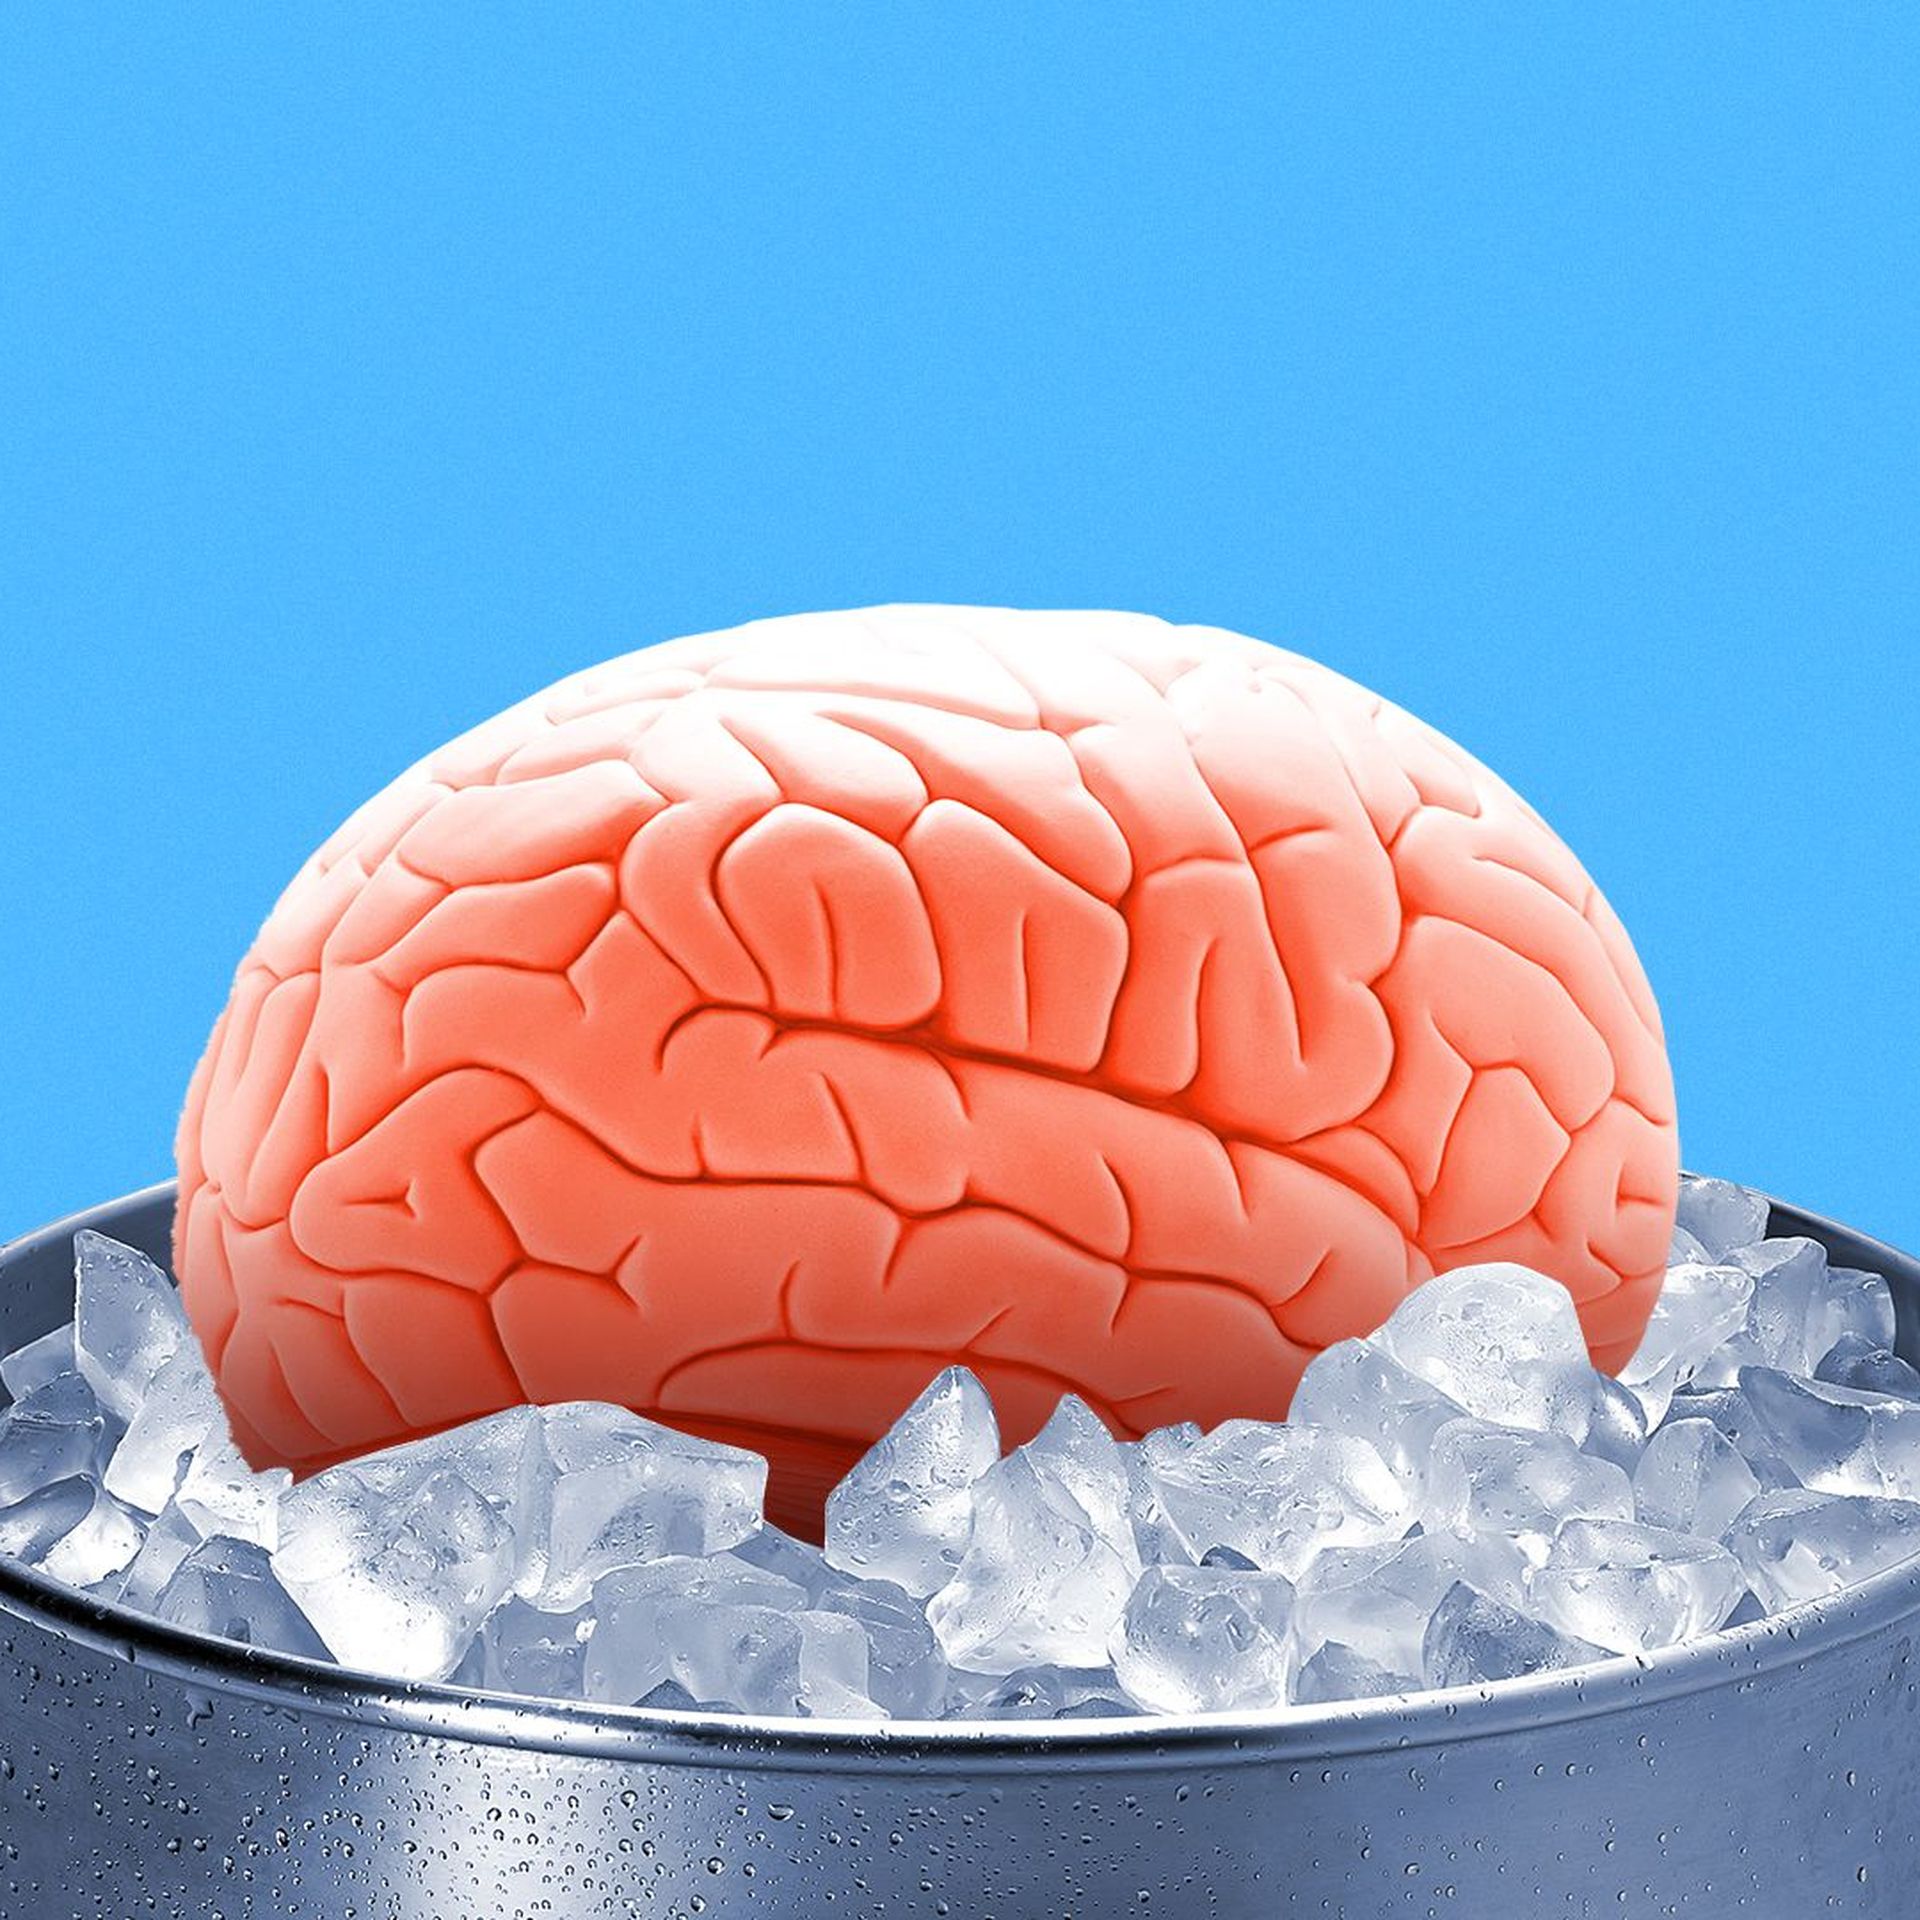 Illustration of a brain in an ice bucket